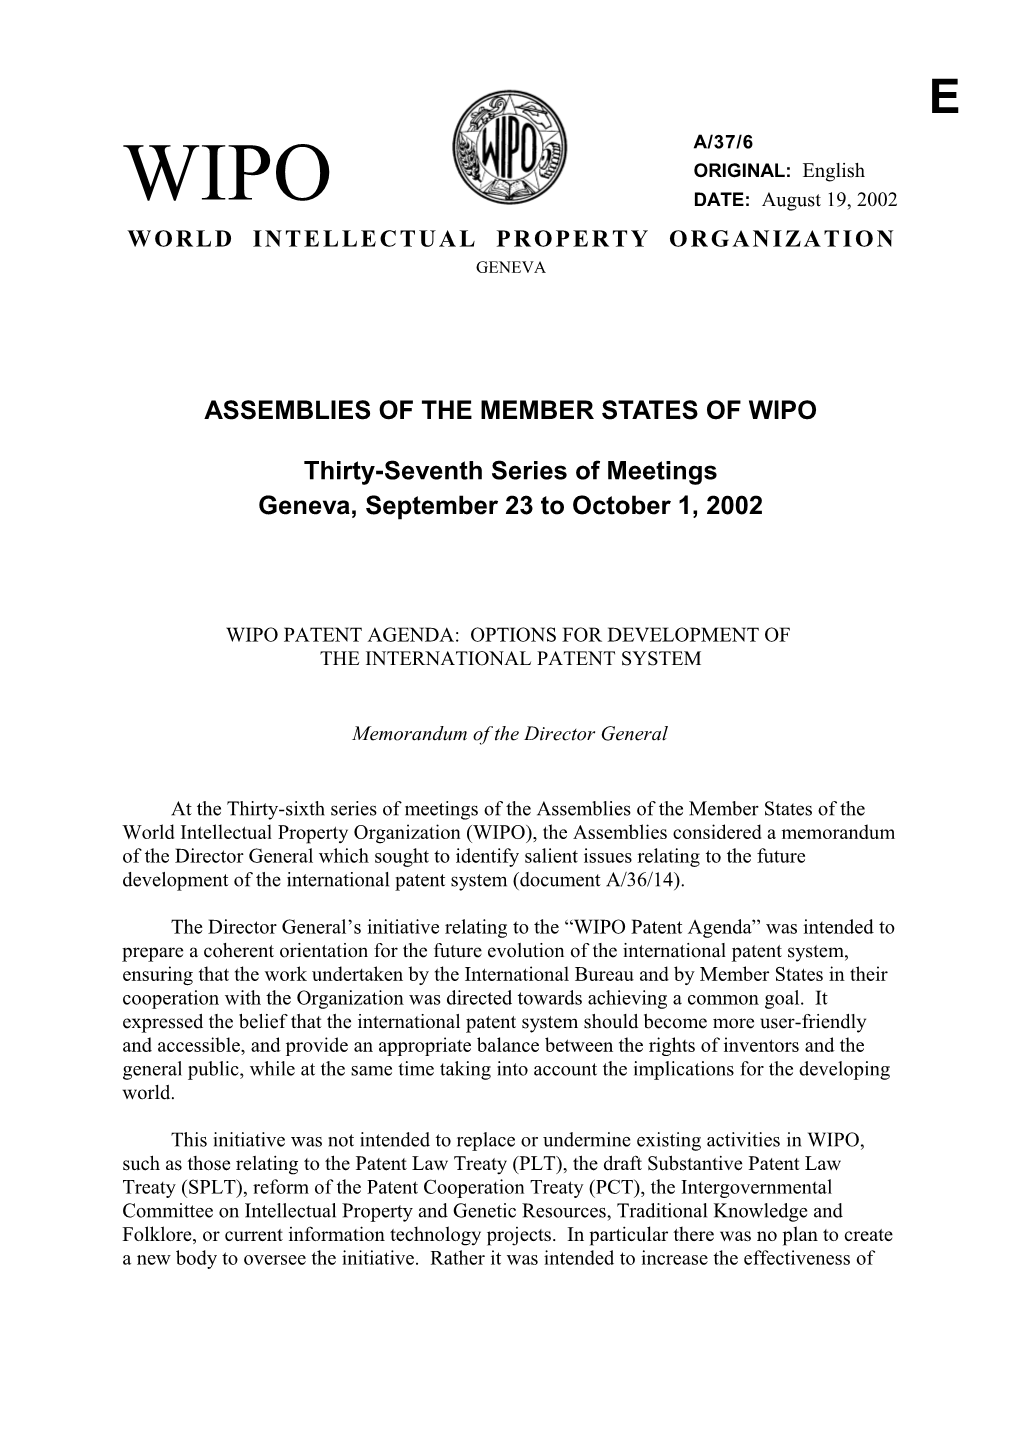 A/37/6: WIPO Patent Agenda: Options for Development of the International Patent System